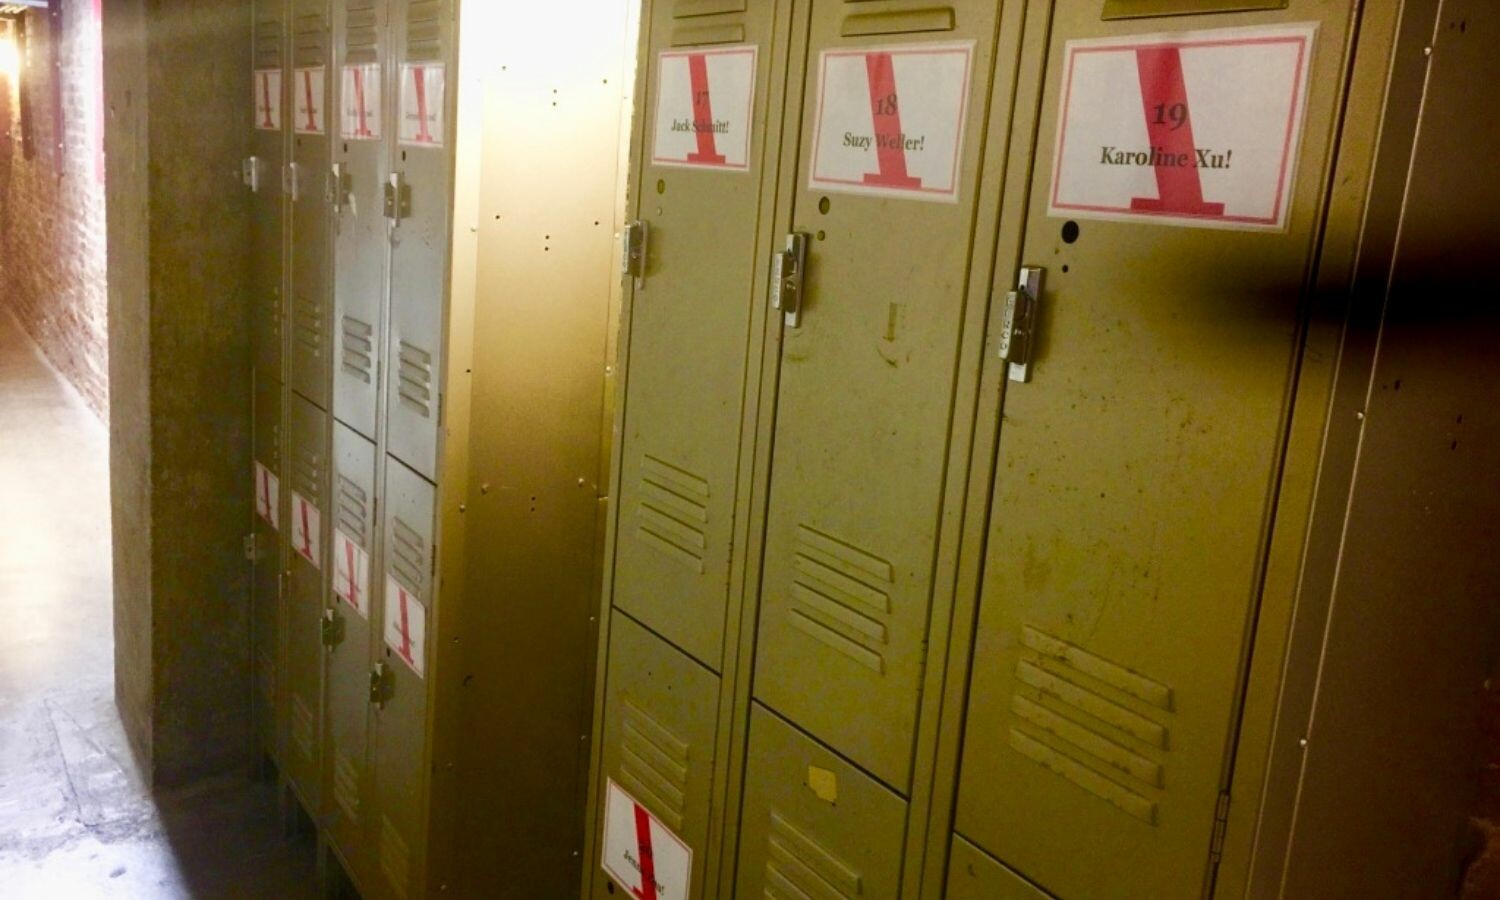 Seven sets of lockers with interns names taped on them.